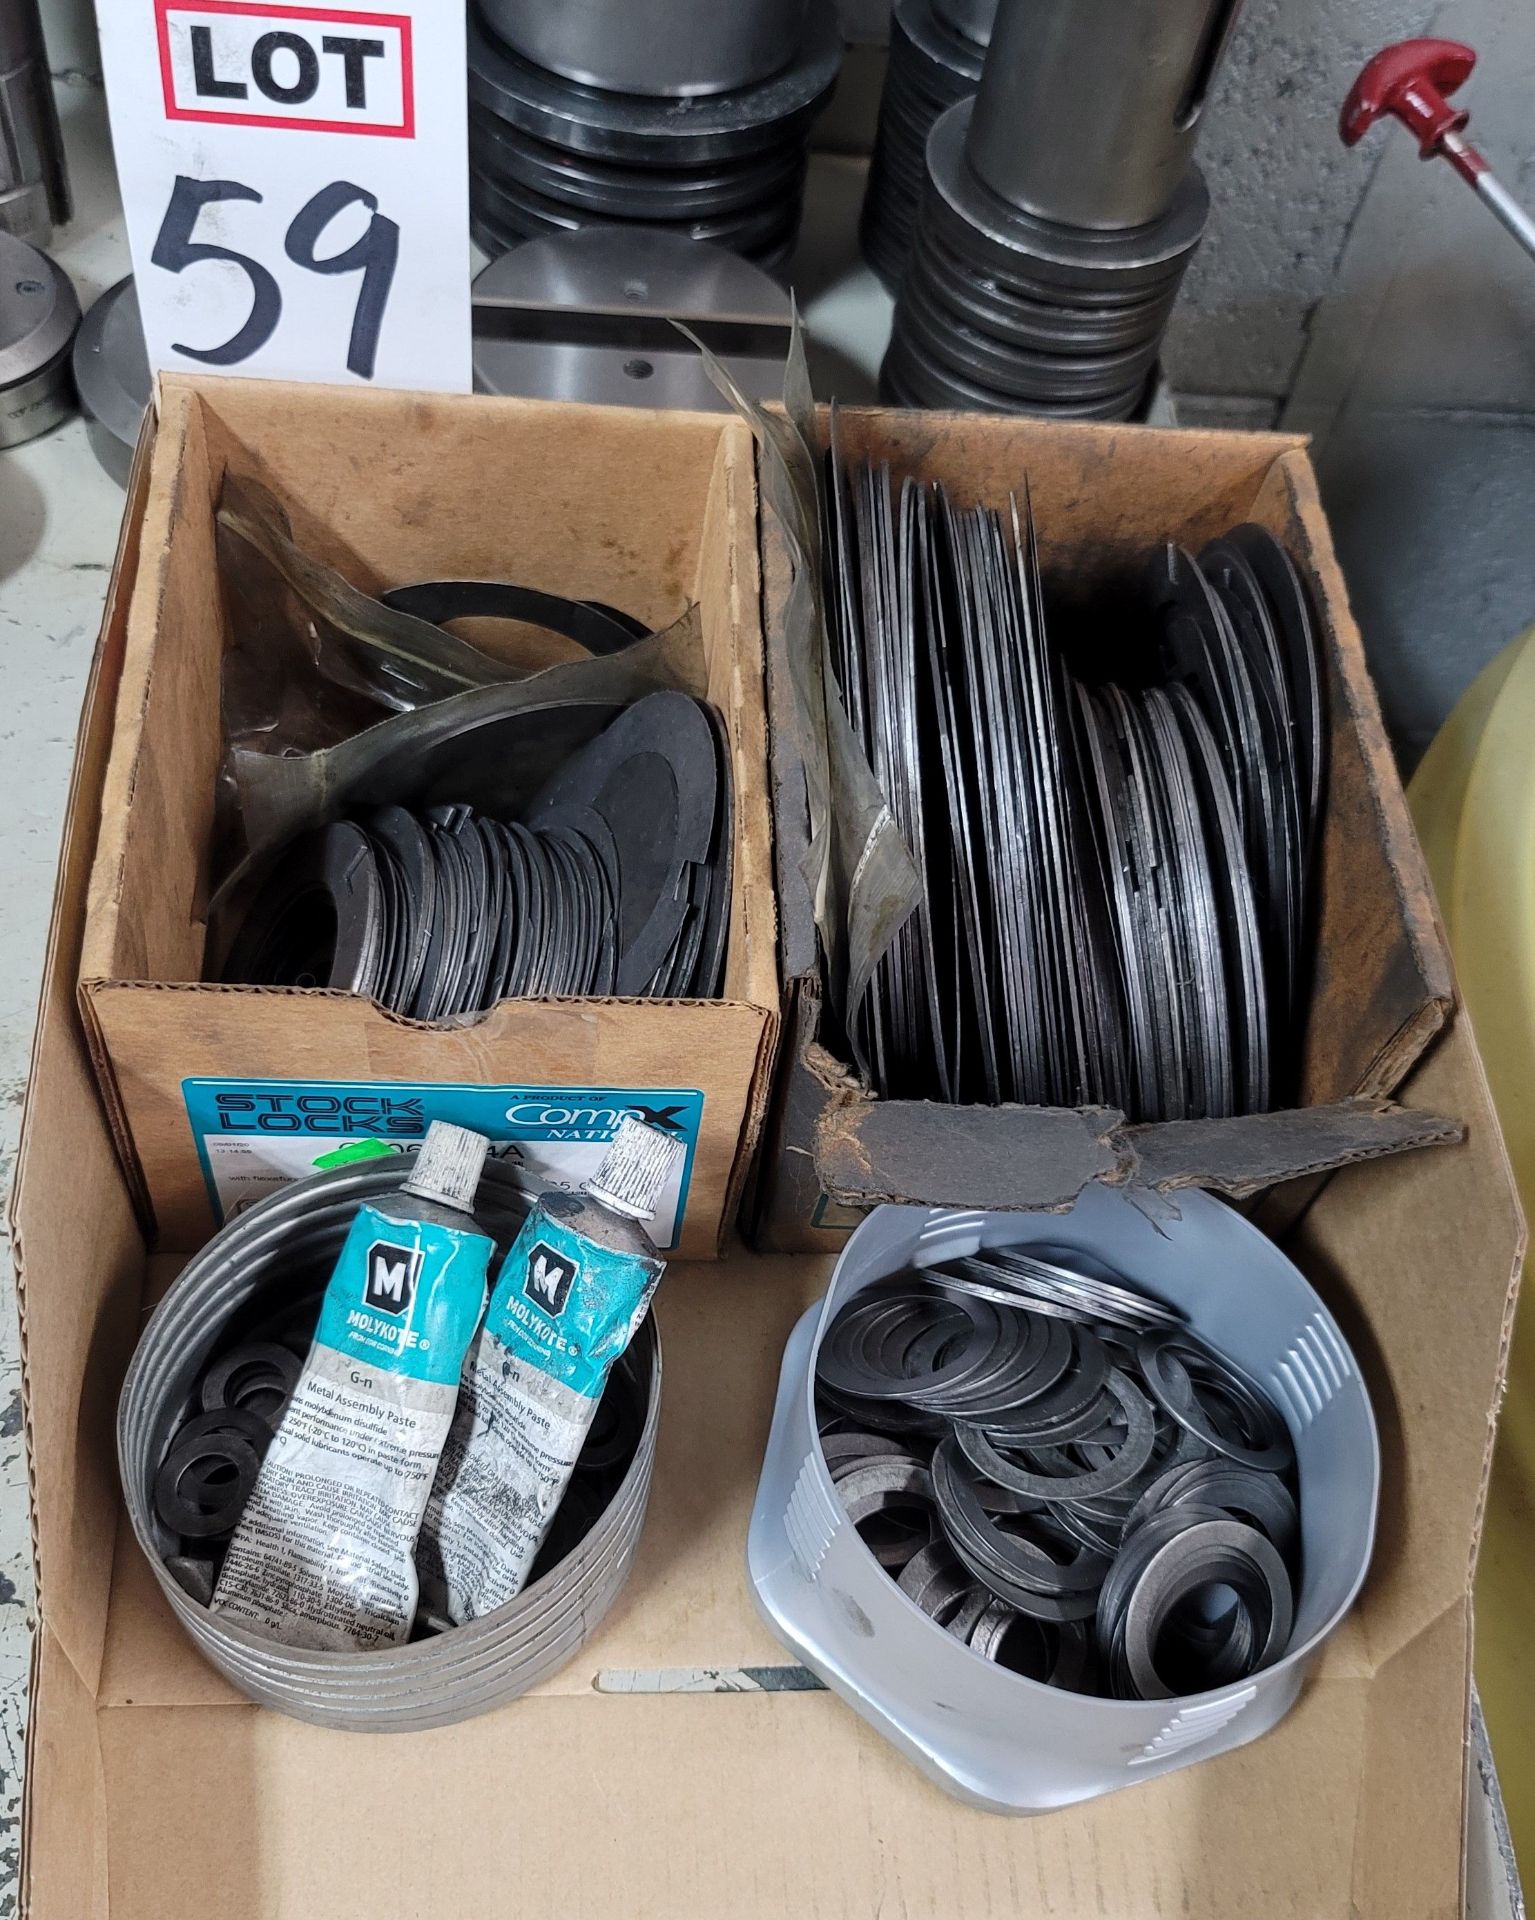 LOT - PUNCH SHIMS, (LOCATION: 2174 W 2300 S)